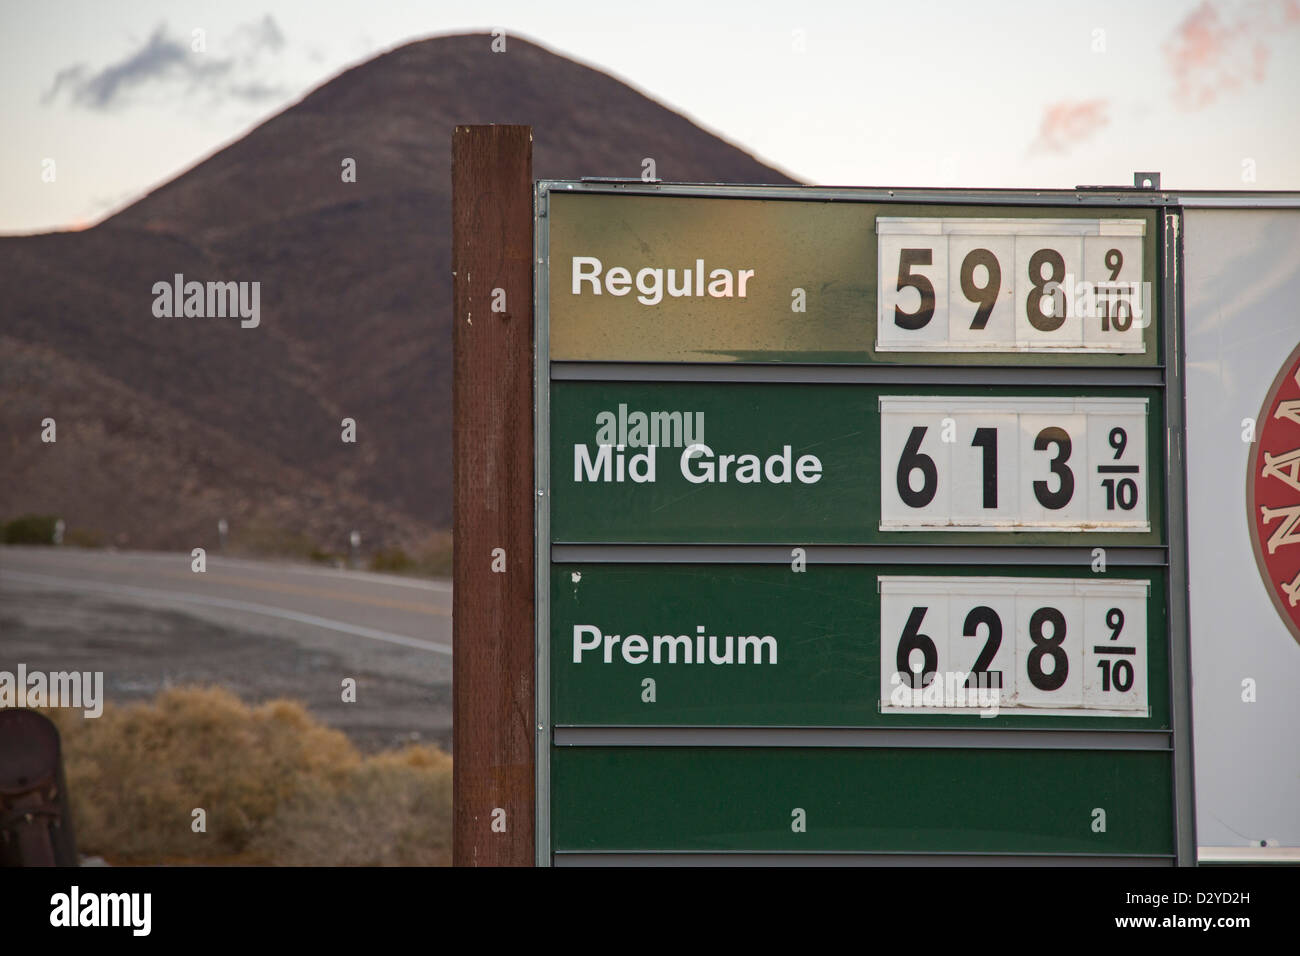 Death Valley National Park, California - Gasoline prices of about $6 a gallon posted at gas station at Panamint Springs resort. Stock Photo